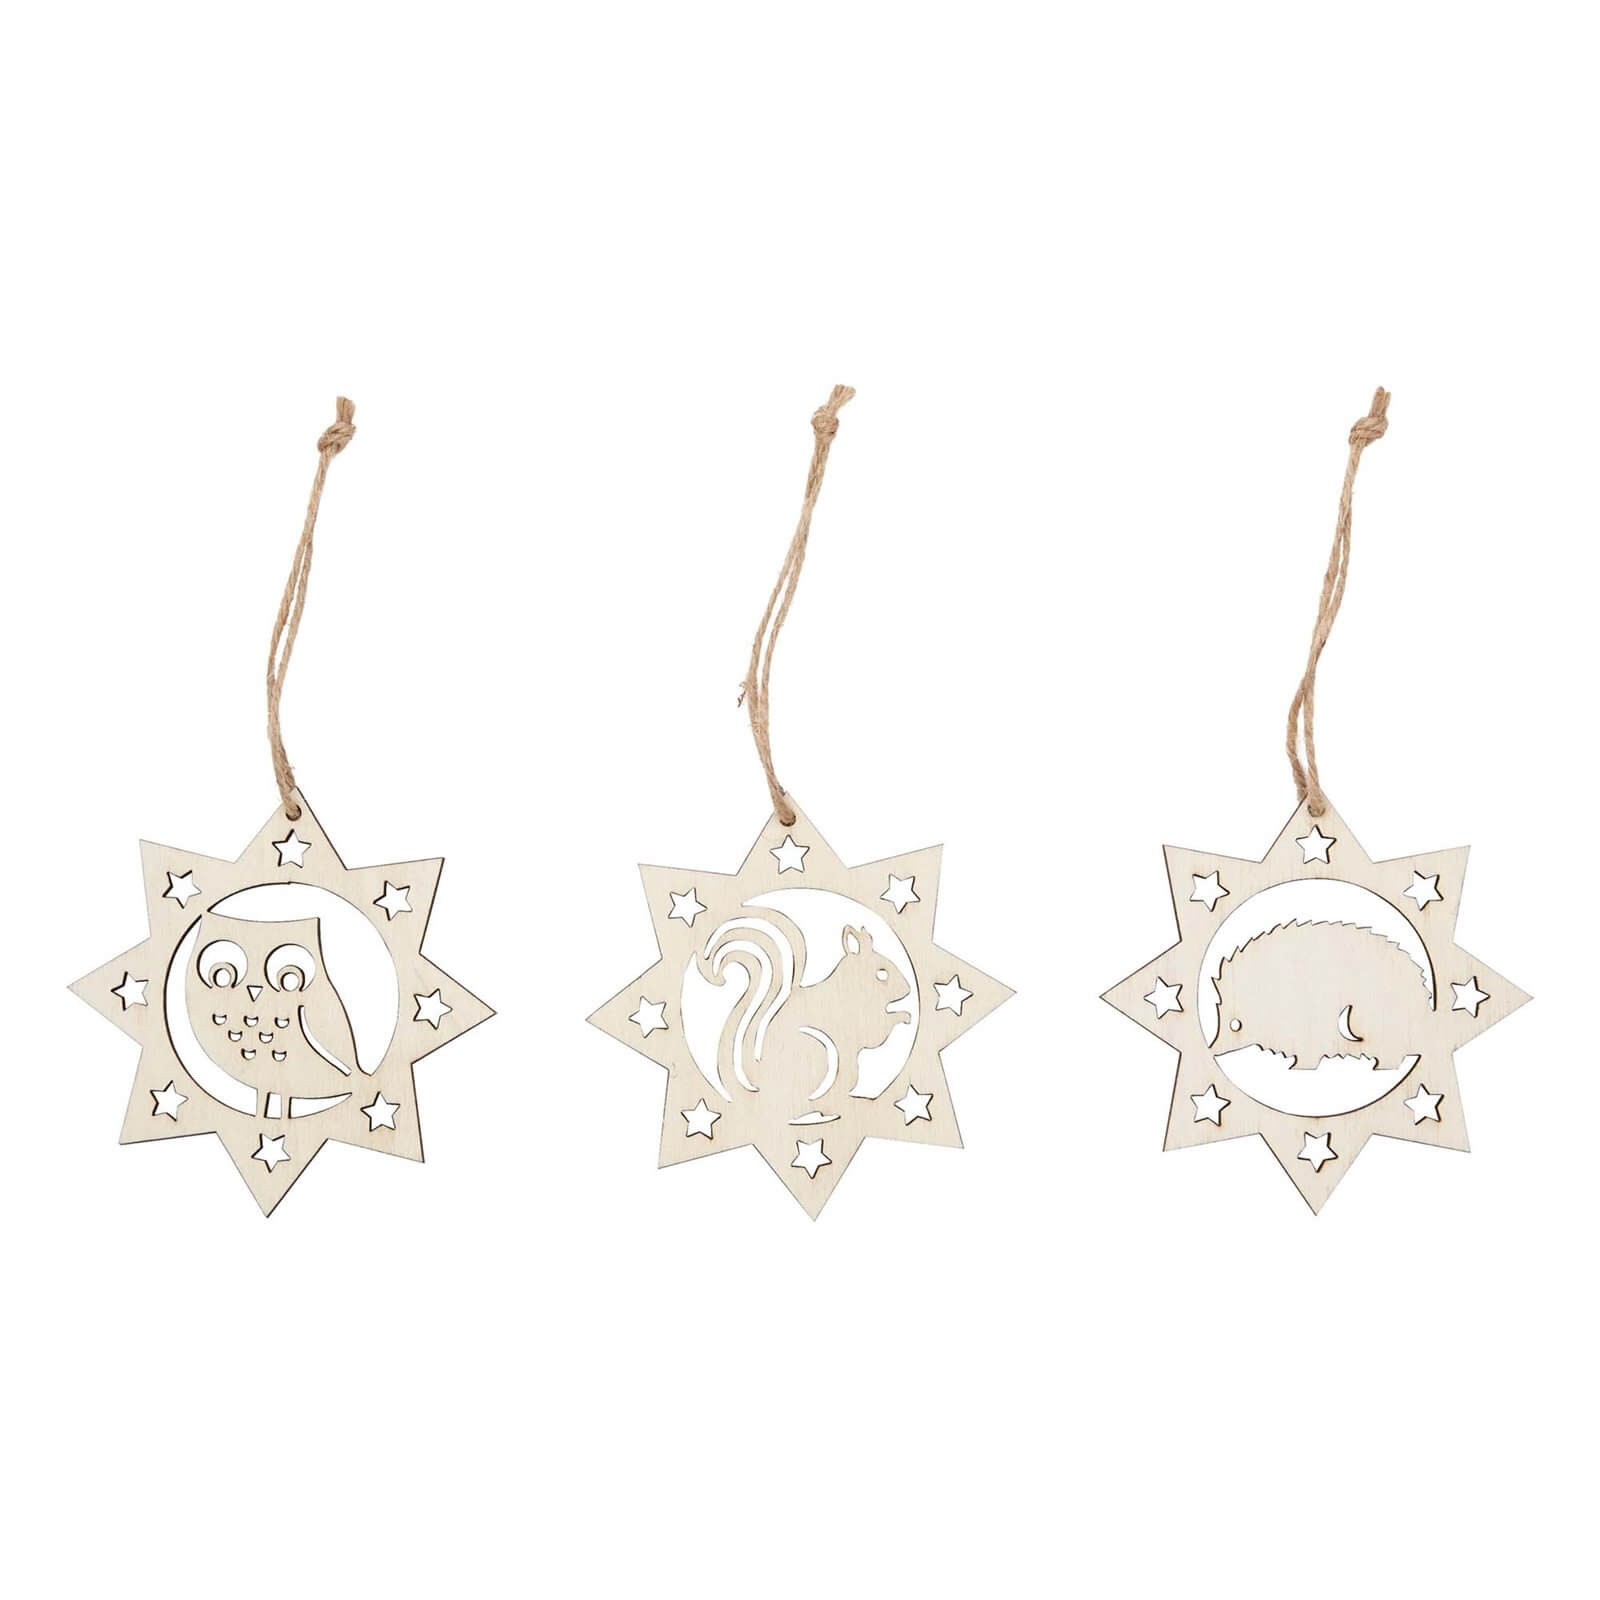 Pack of 9 Wooden Animal Hanging Tree Decorations